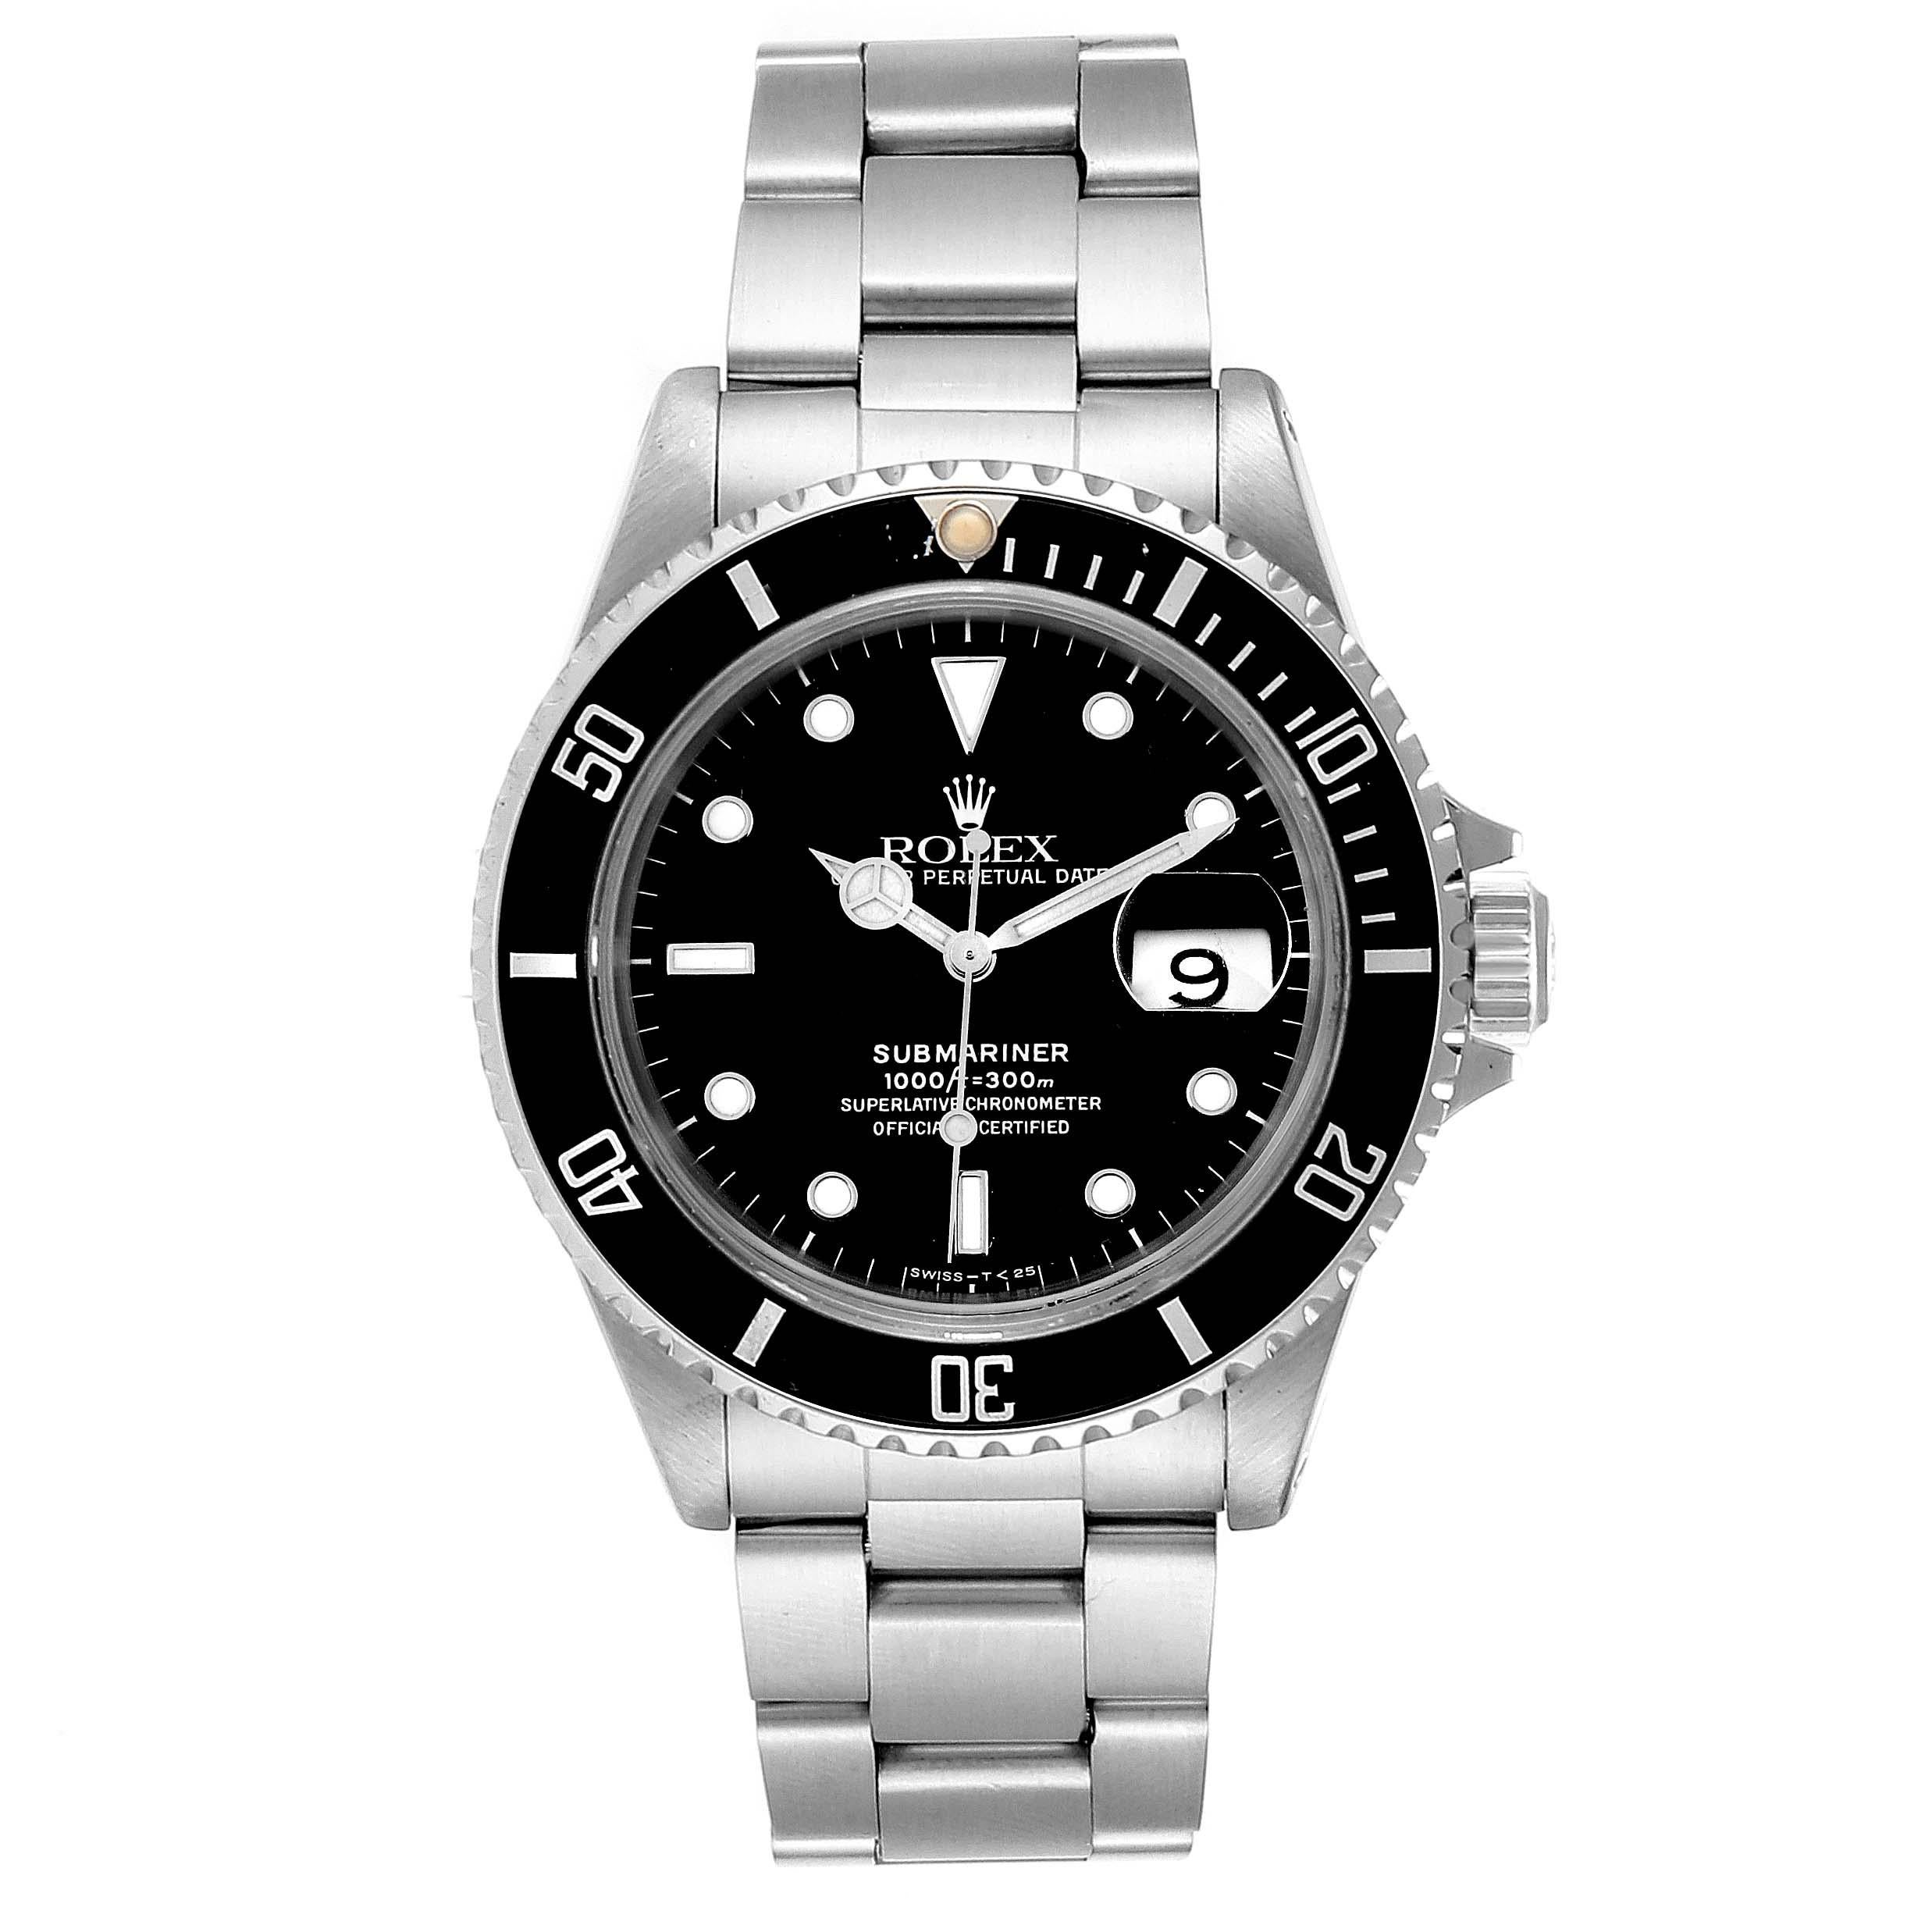 Rolex Submariner Date 40mm Stainless Steel Mens Watch 16610. Officially certified chronometer self-winding movement. Stainless steel case 40.0 mm in diameter. Rolex logo on a crown. Special time-lapse unidirectional rotating bezel. Scratch resistant